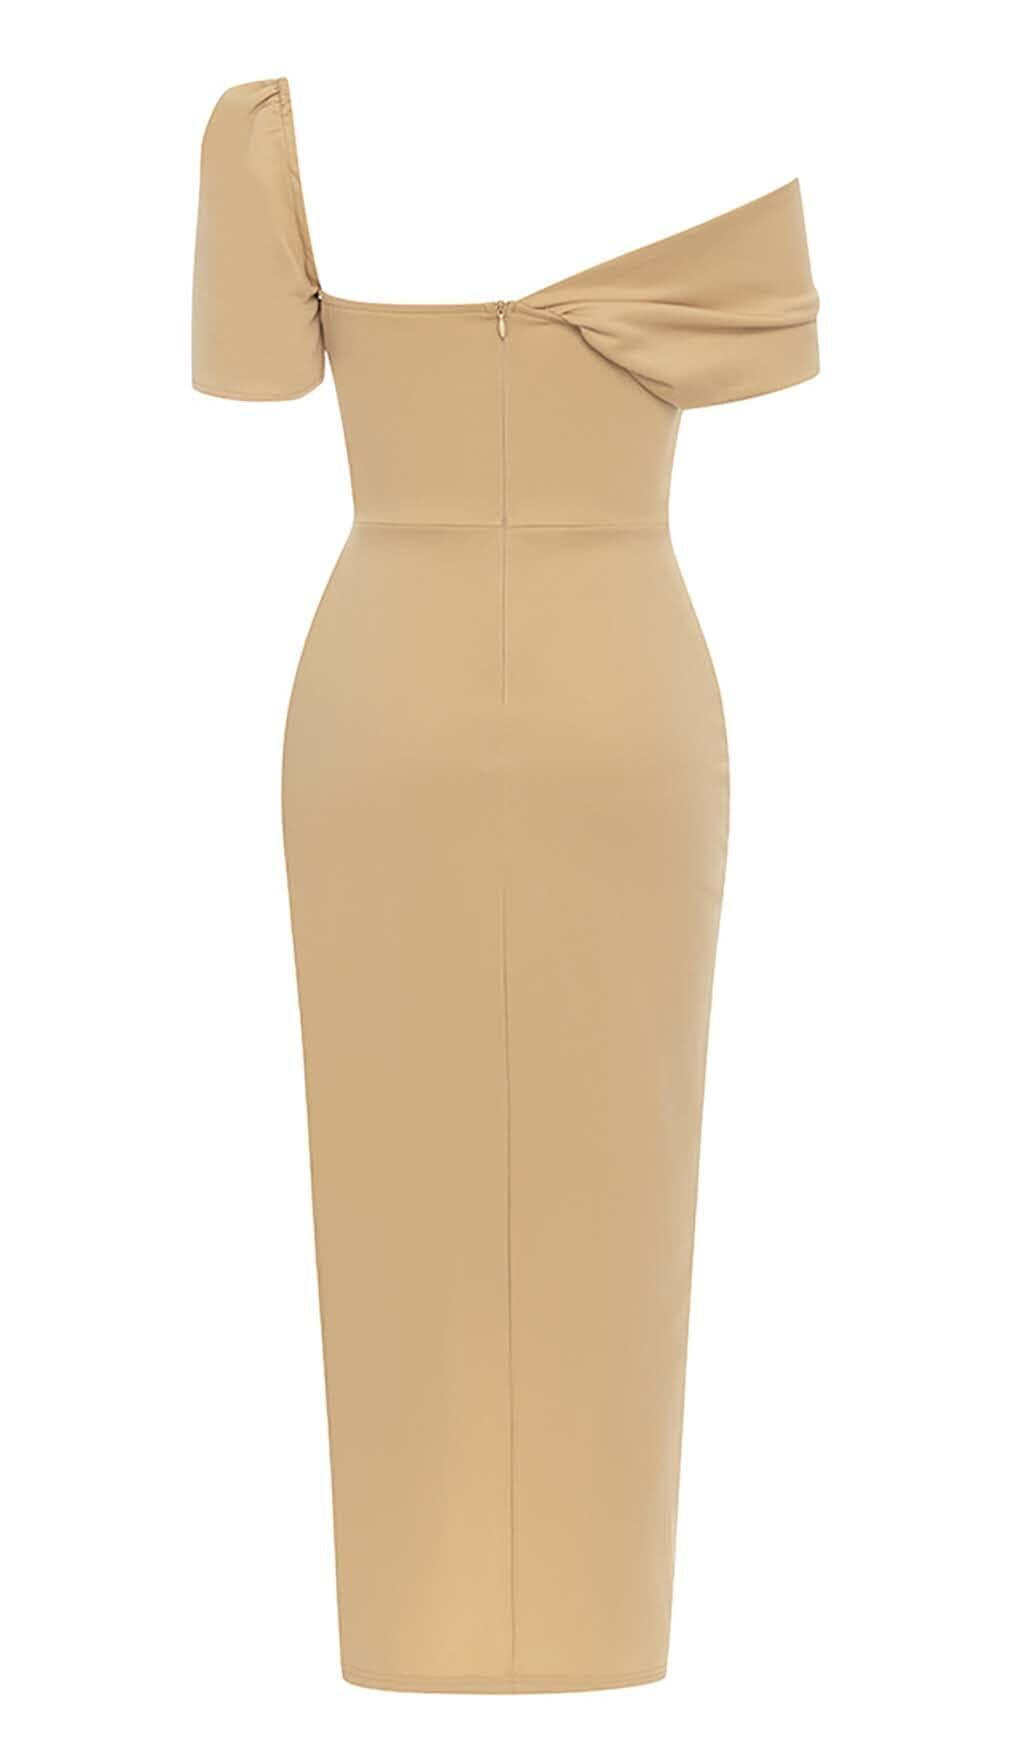 ONE SHOULDER BANDAGE MAXI DRESS IN APRICOT